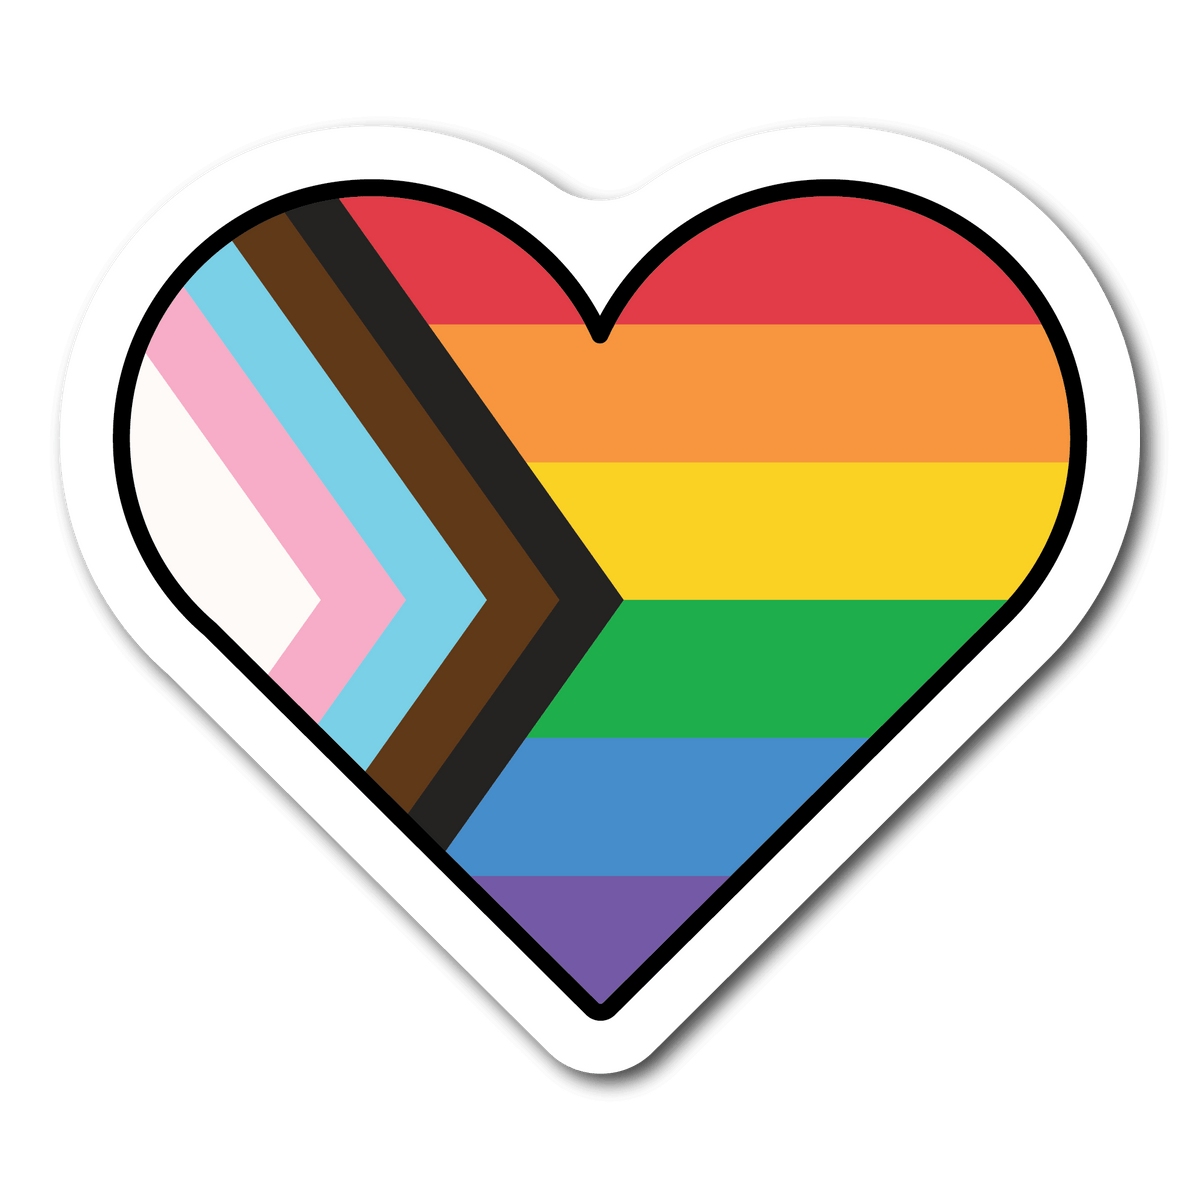 Small Sticker of the Progress Pride Flag in the Shape of a heart